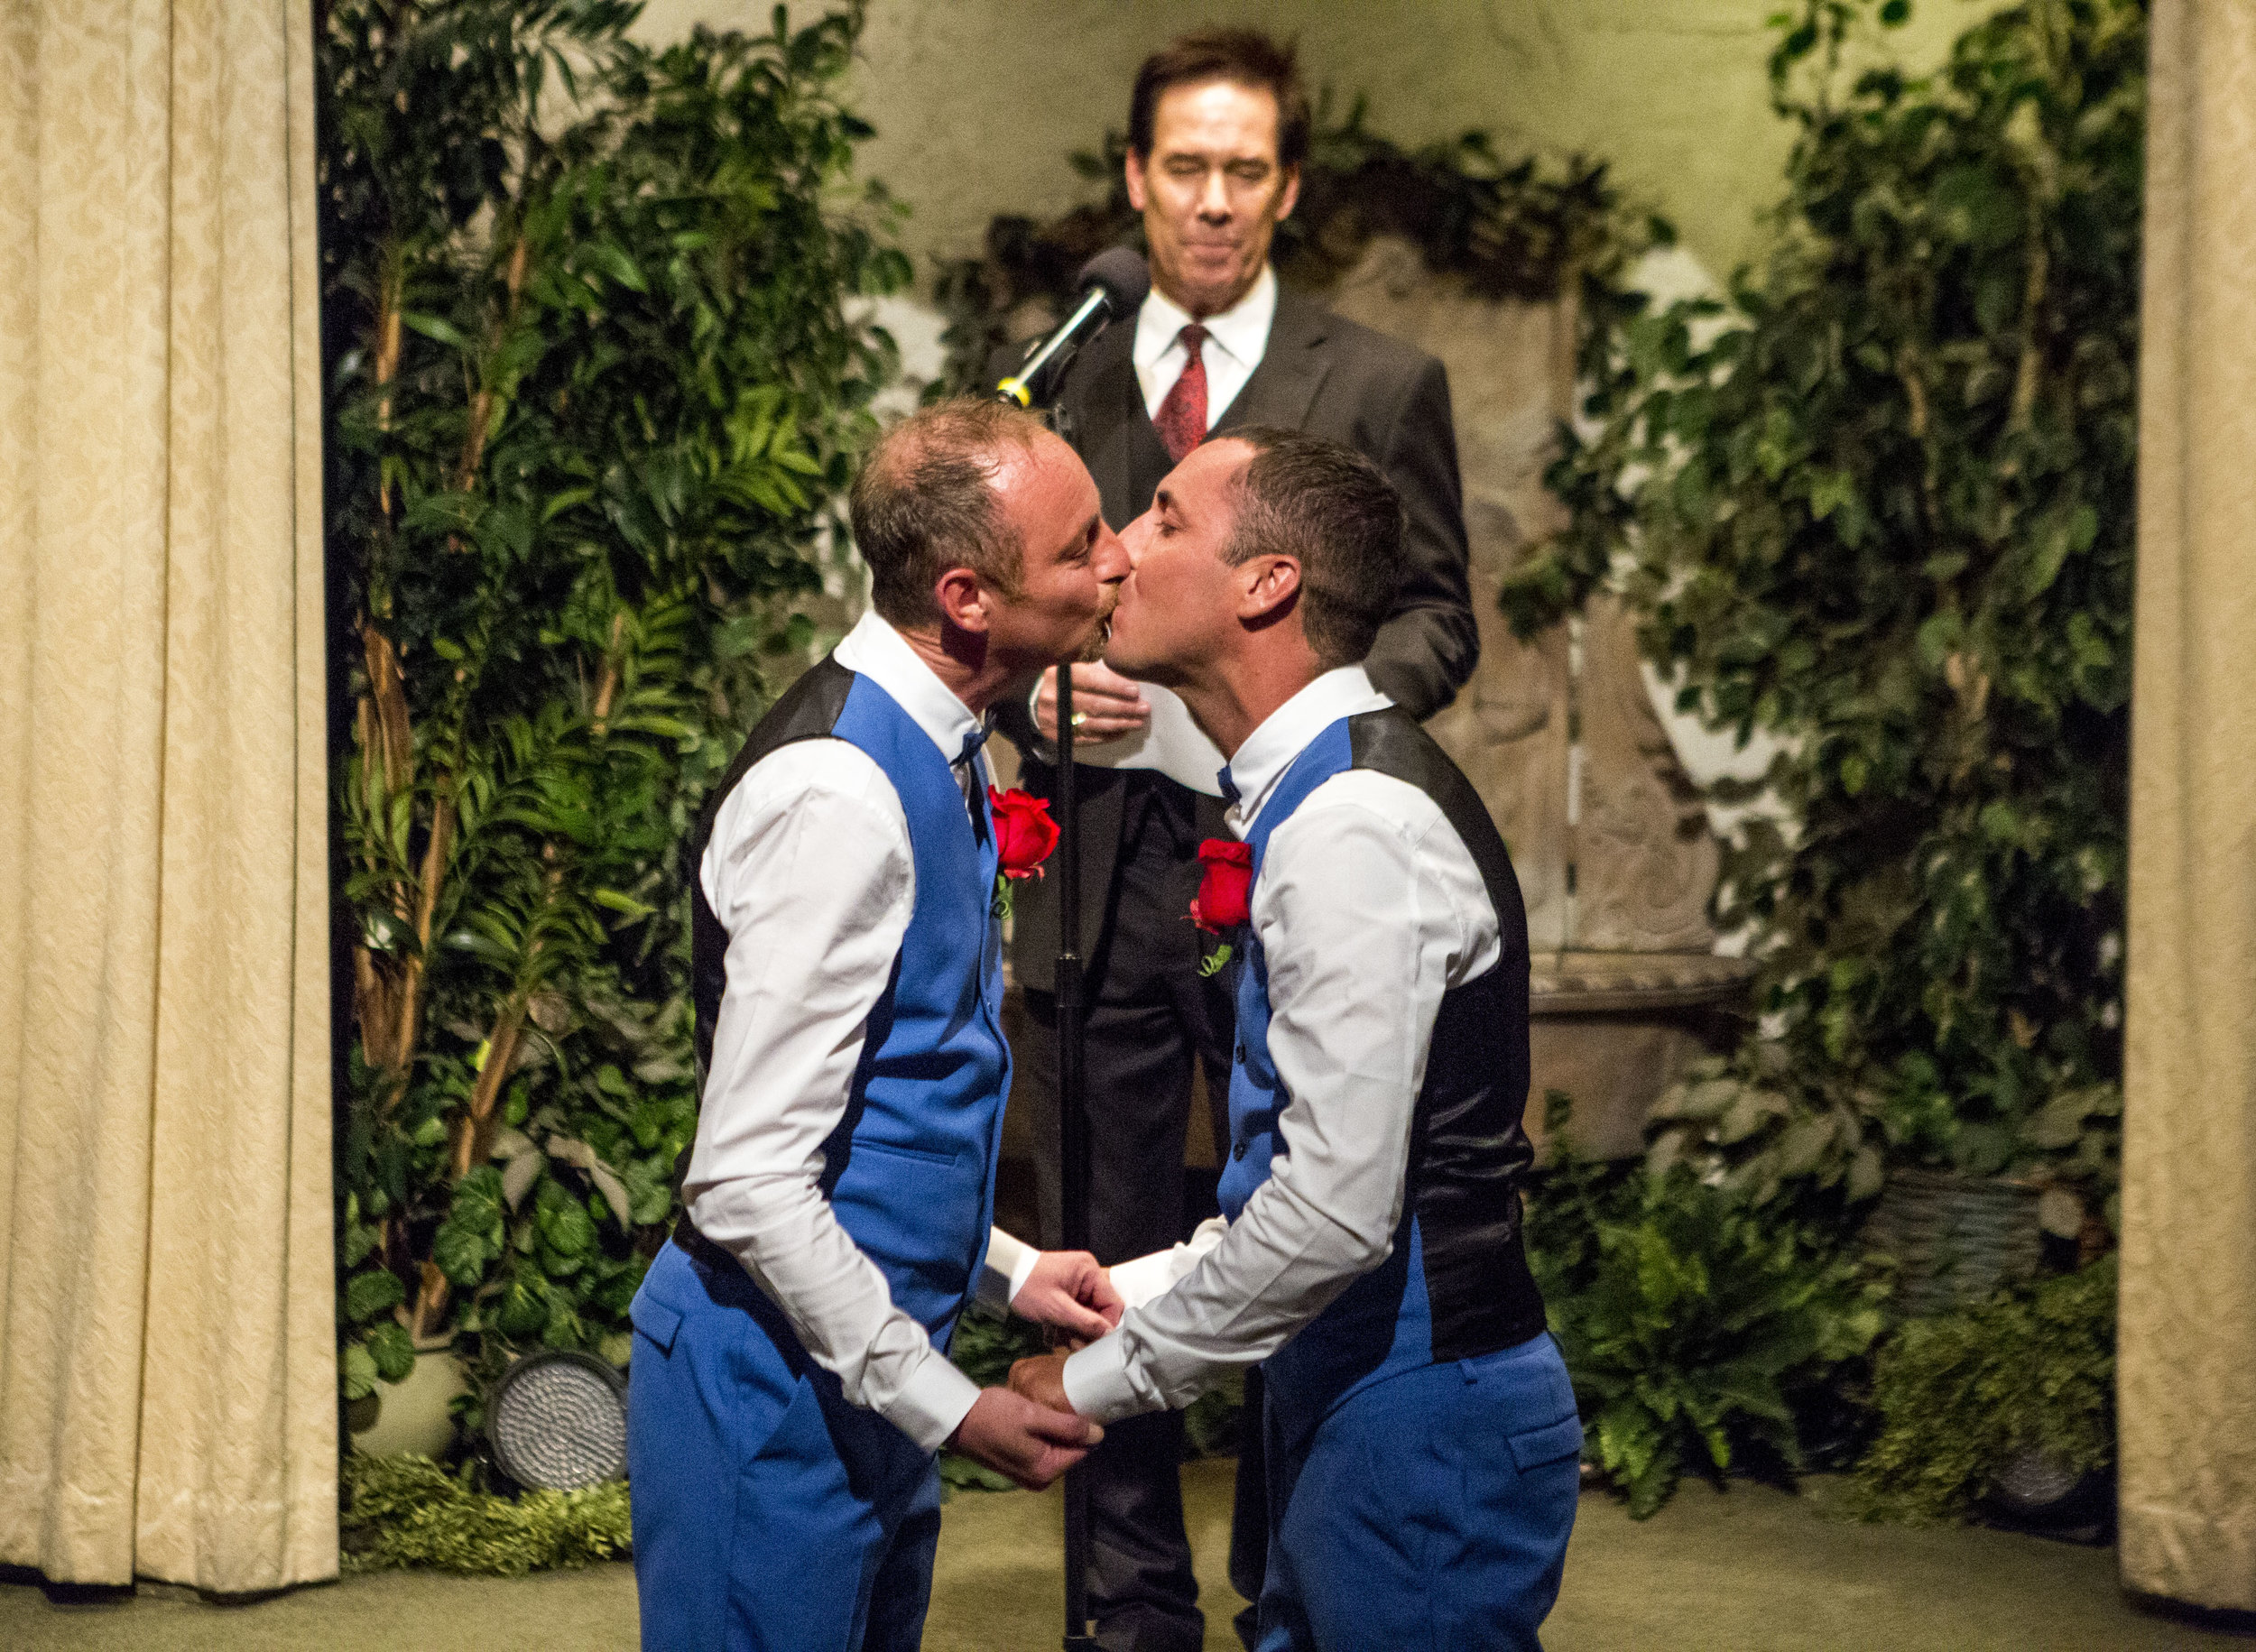  Lee McCulloch, right, and Stuart Dootson of Folkstone, England, kiss during their wedding at the Viva Las Vegas Wedding Chapel on Saturday, June 3, 2017.  Patrick Connolly Las Vegas Review-Journal @PConnPie 